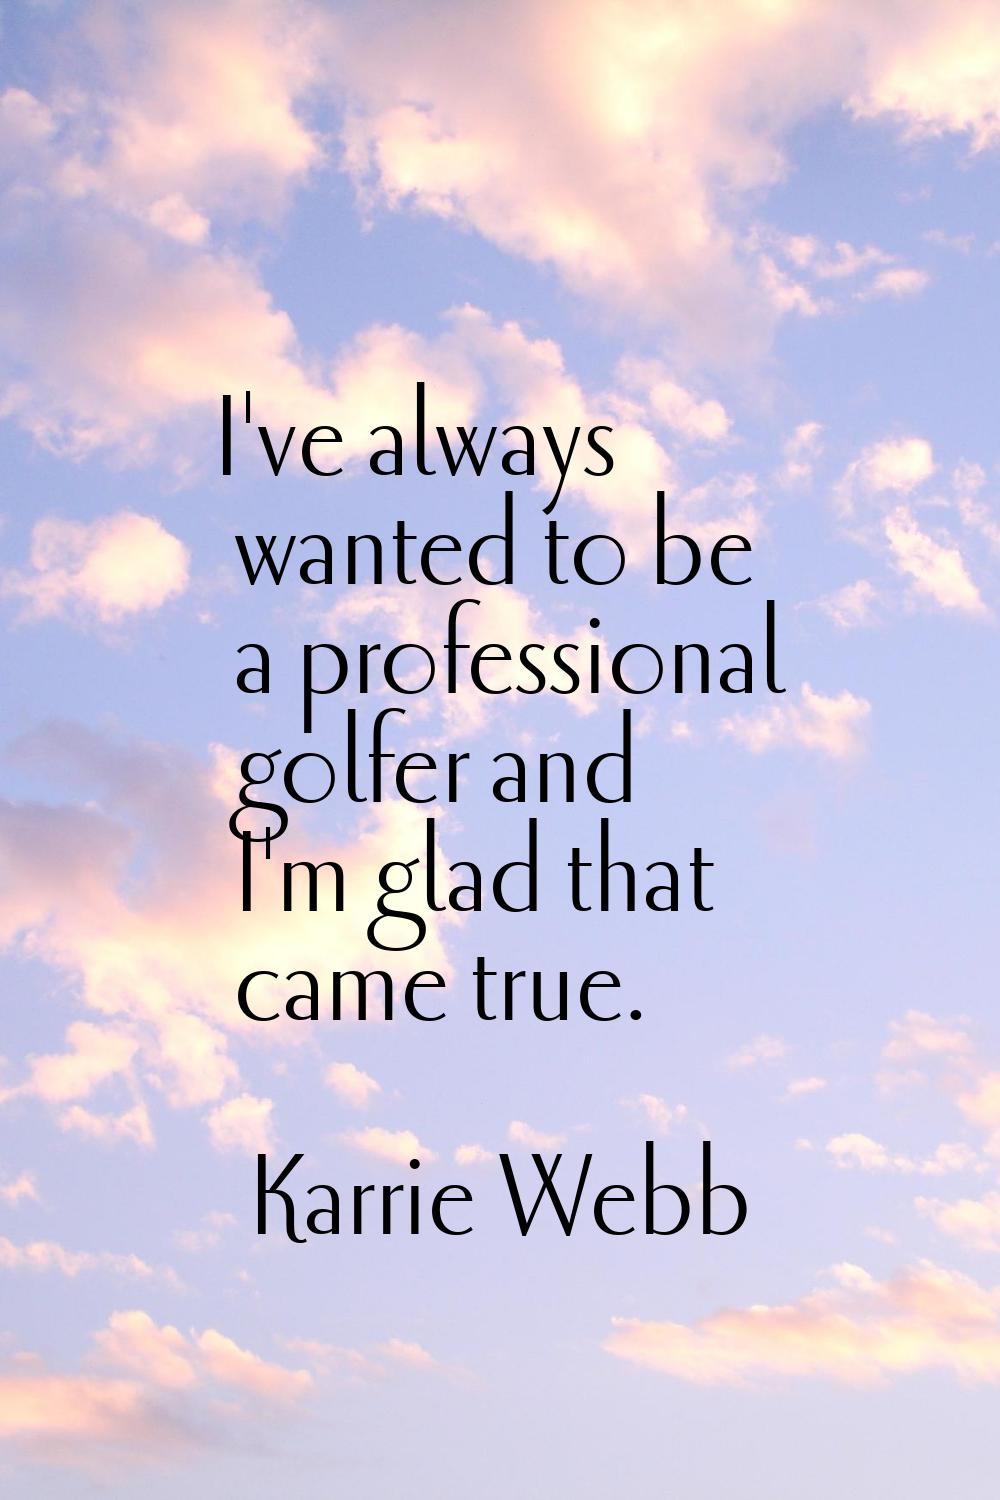 I've always wanted to be a professional golfer and I'm glad that came true.